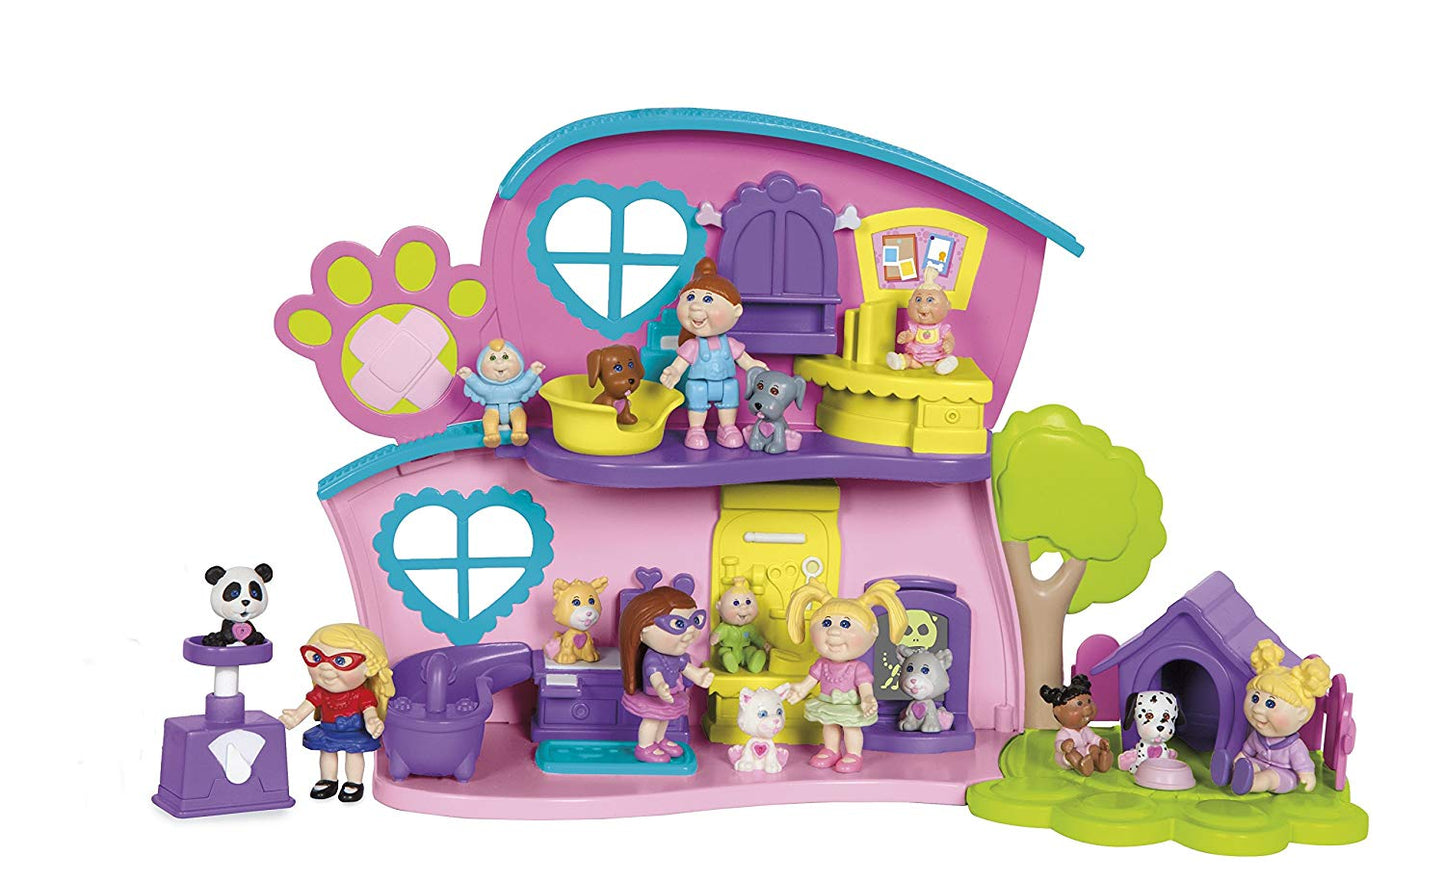 Cabbage Patch Kids Little Sprouts Lil' Vet Center Play Set